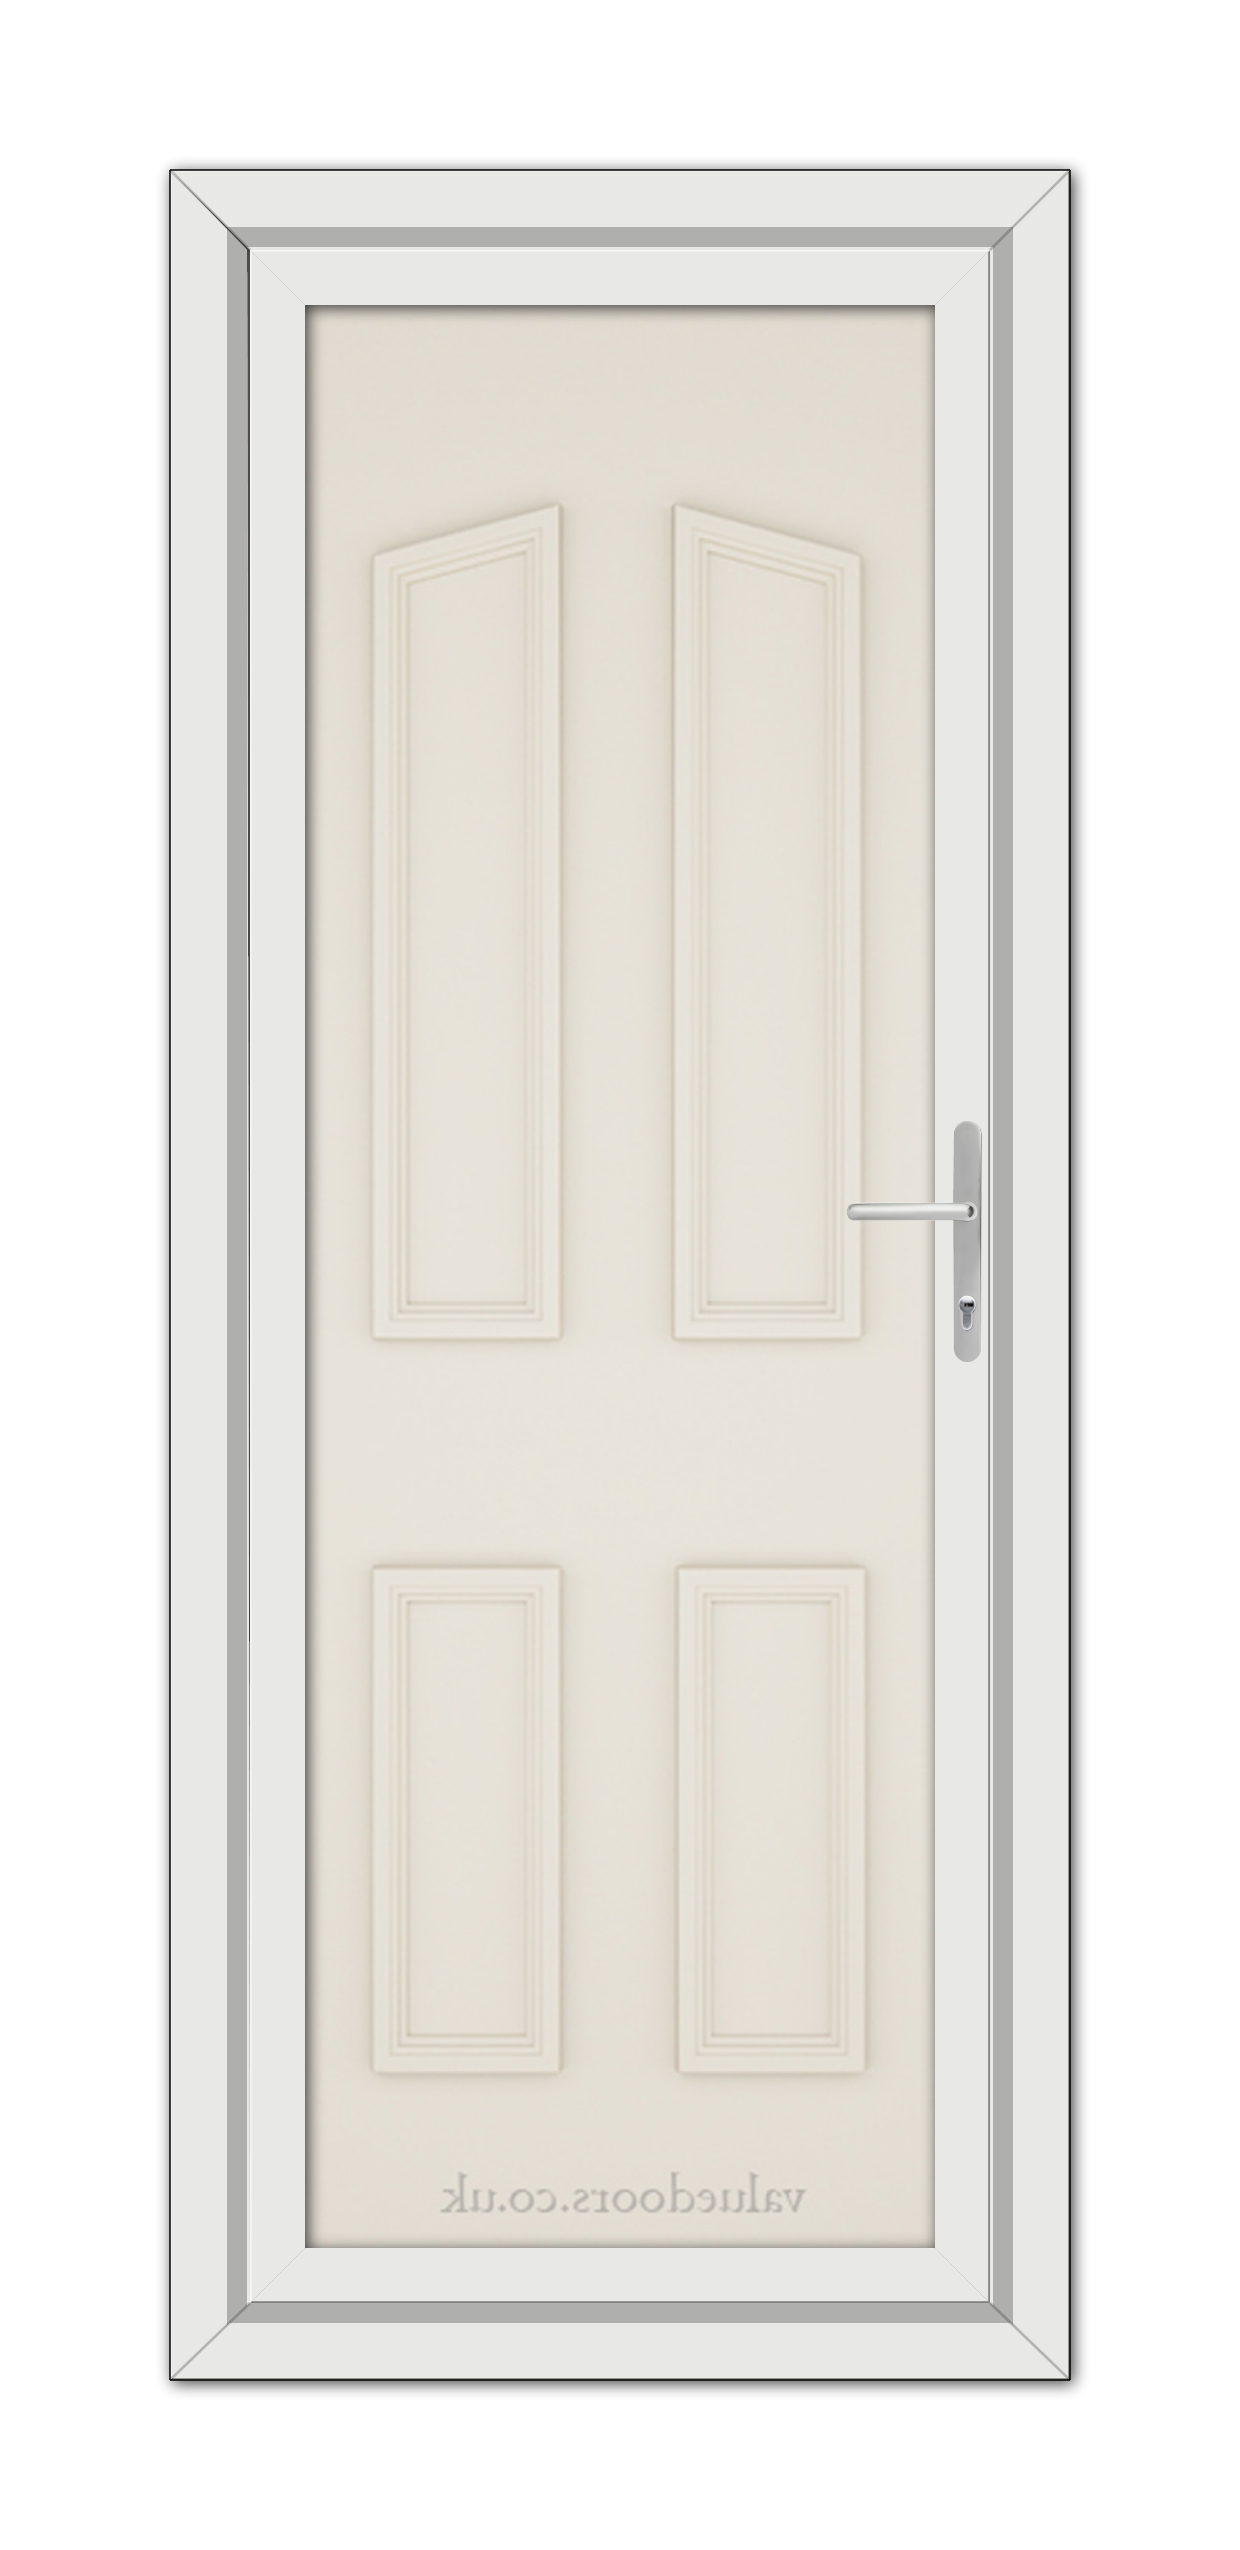 A vertical image of a closed Cream Kensington Solid uPVC Door with a silver handle, set within a light grey frame.